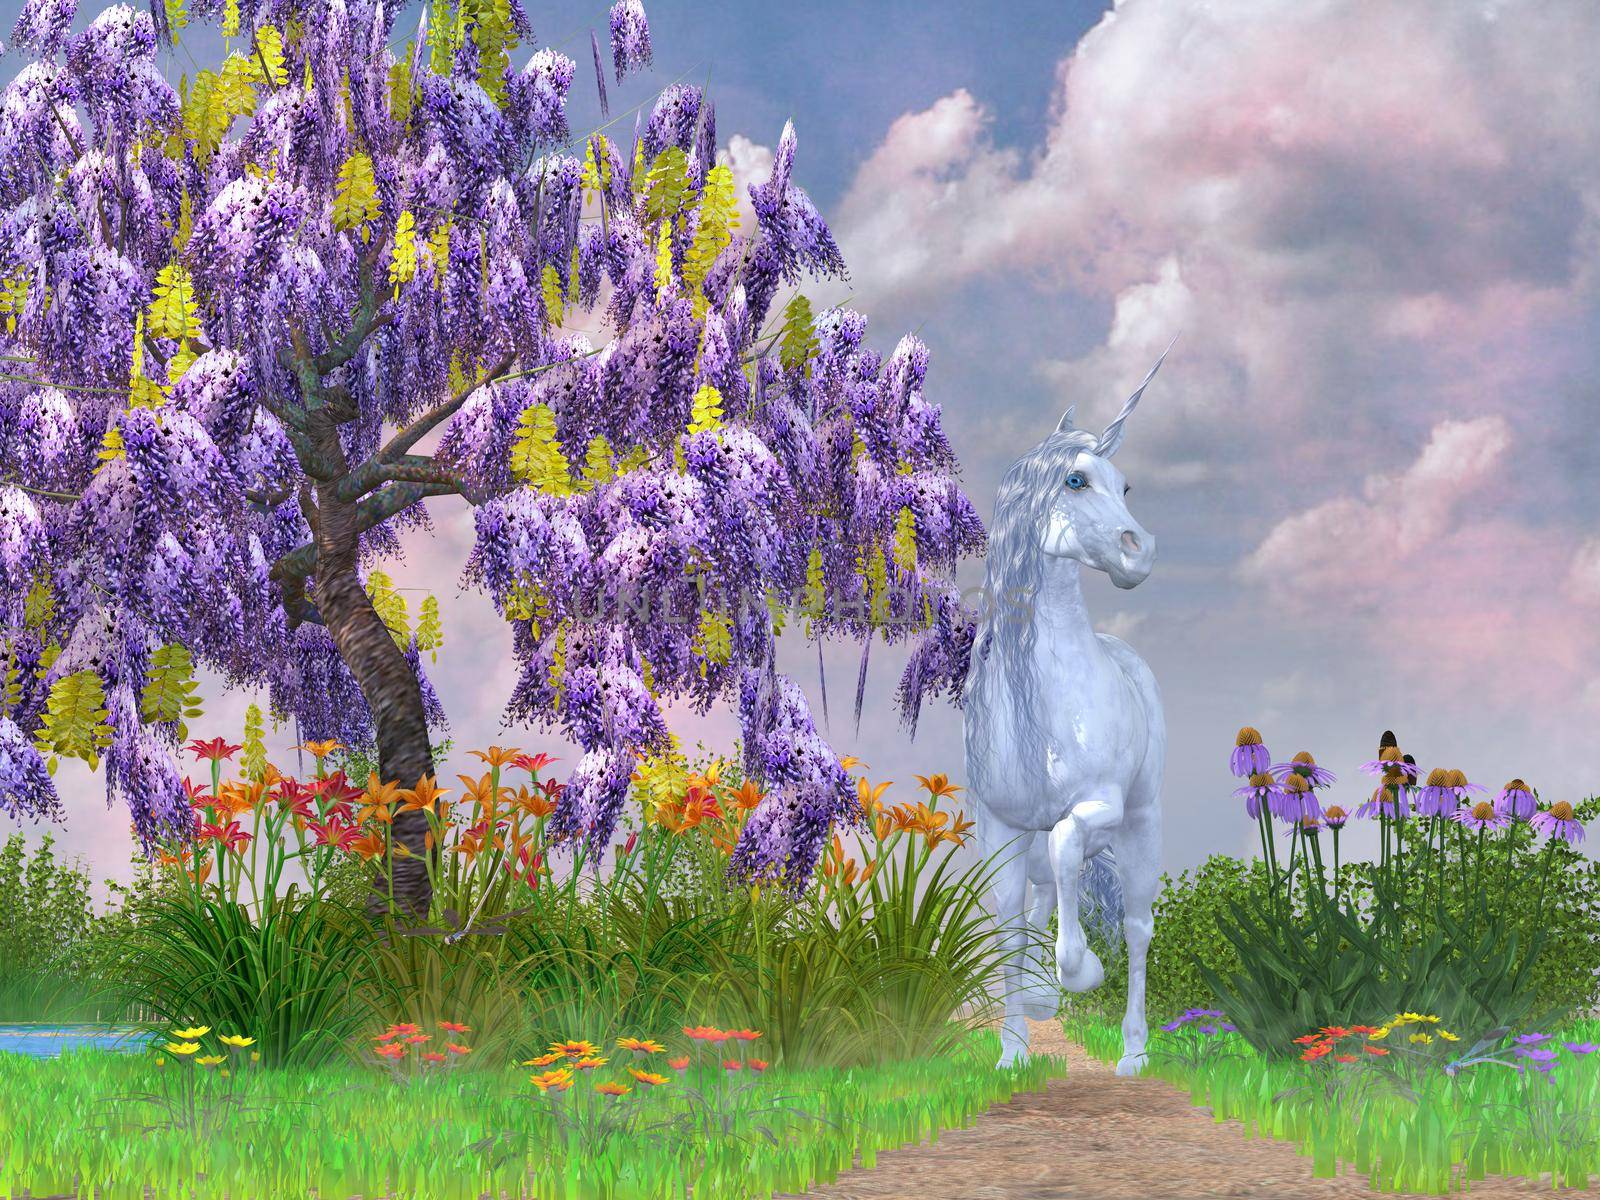 A legendary white Unicorn follows a path surrounded by flowers and a purple Wisteria tree.